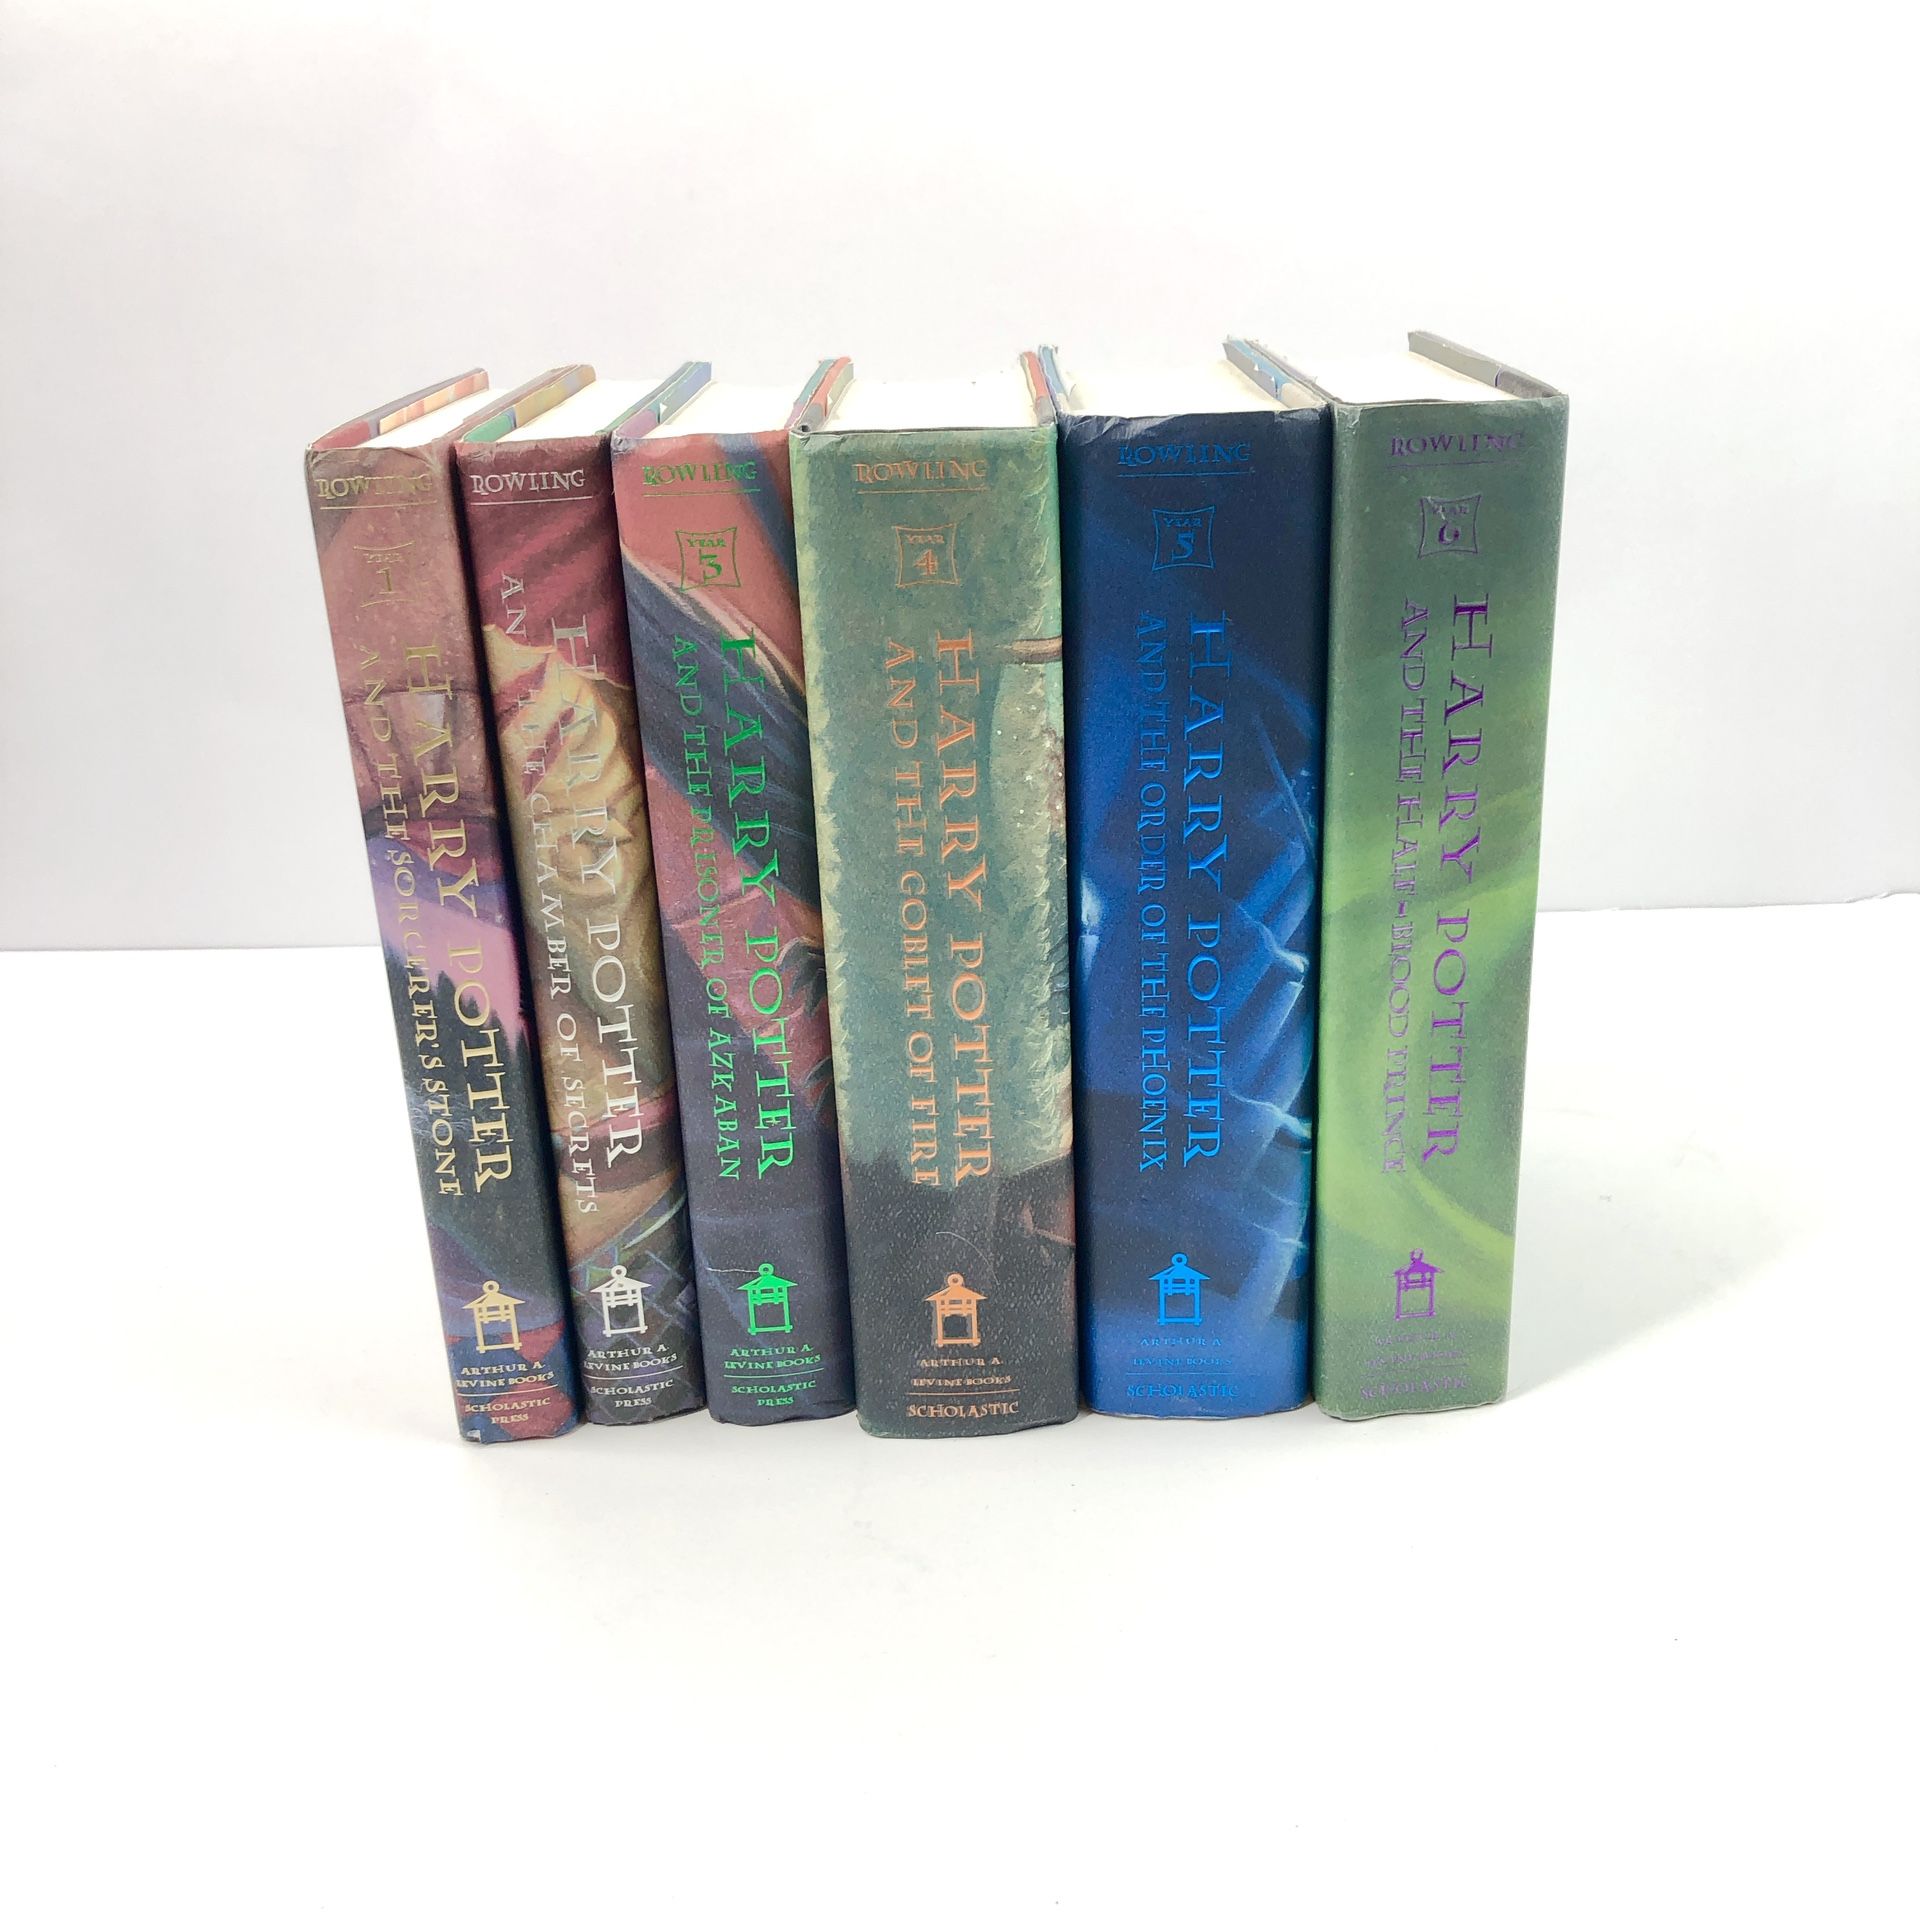 HARRY POTTER Complete Hardcover Book Set 1-6 J.K. Rowling Collection GOOD